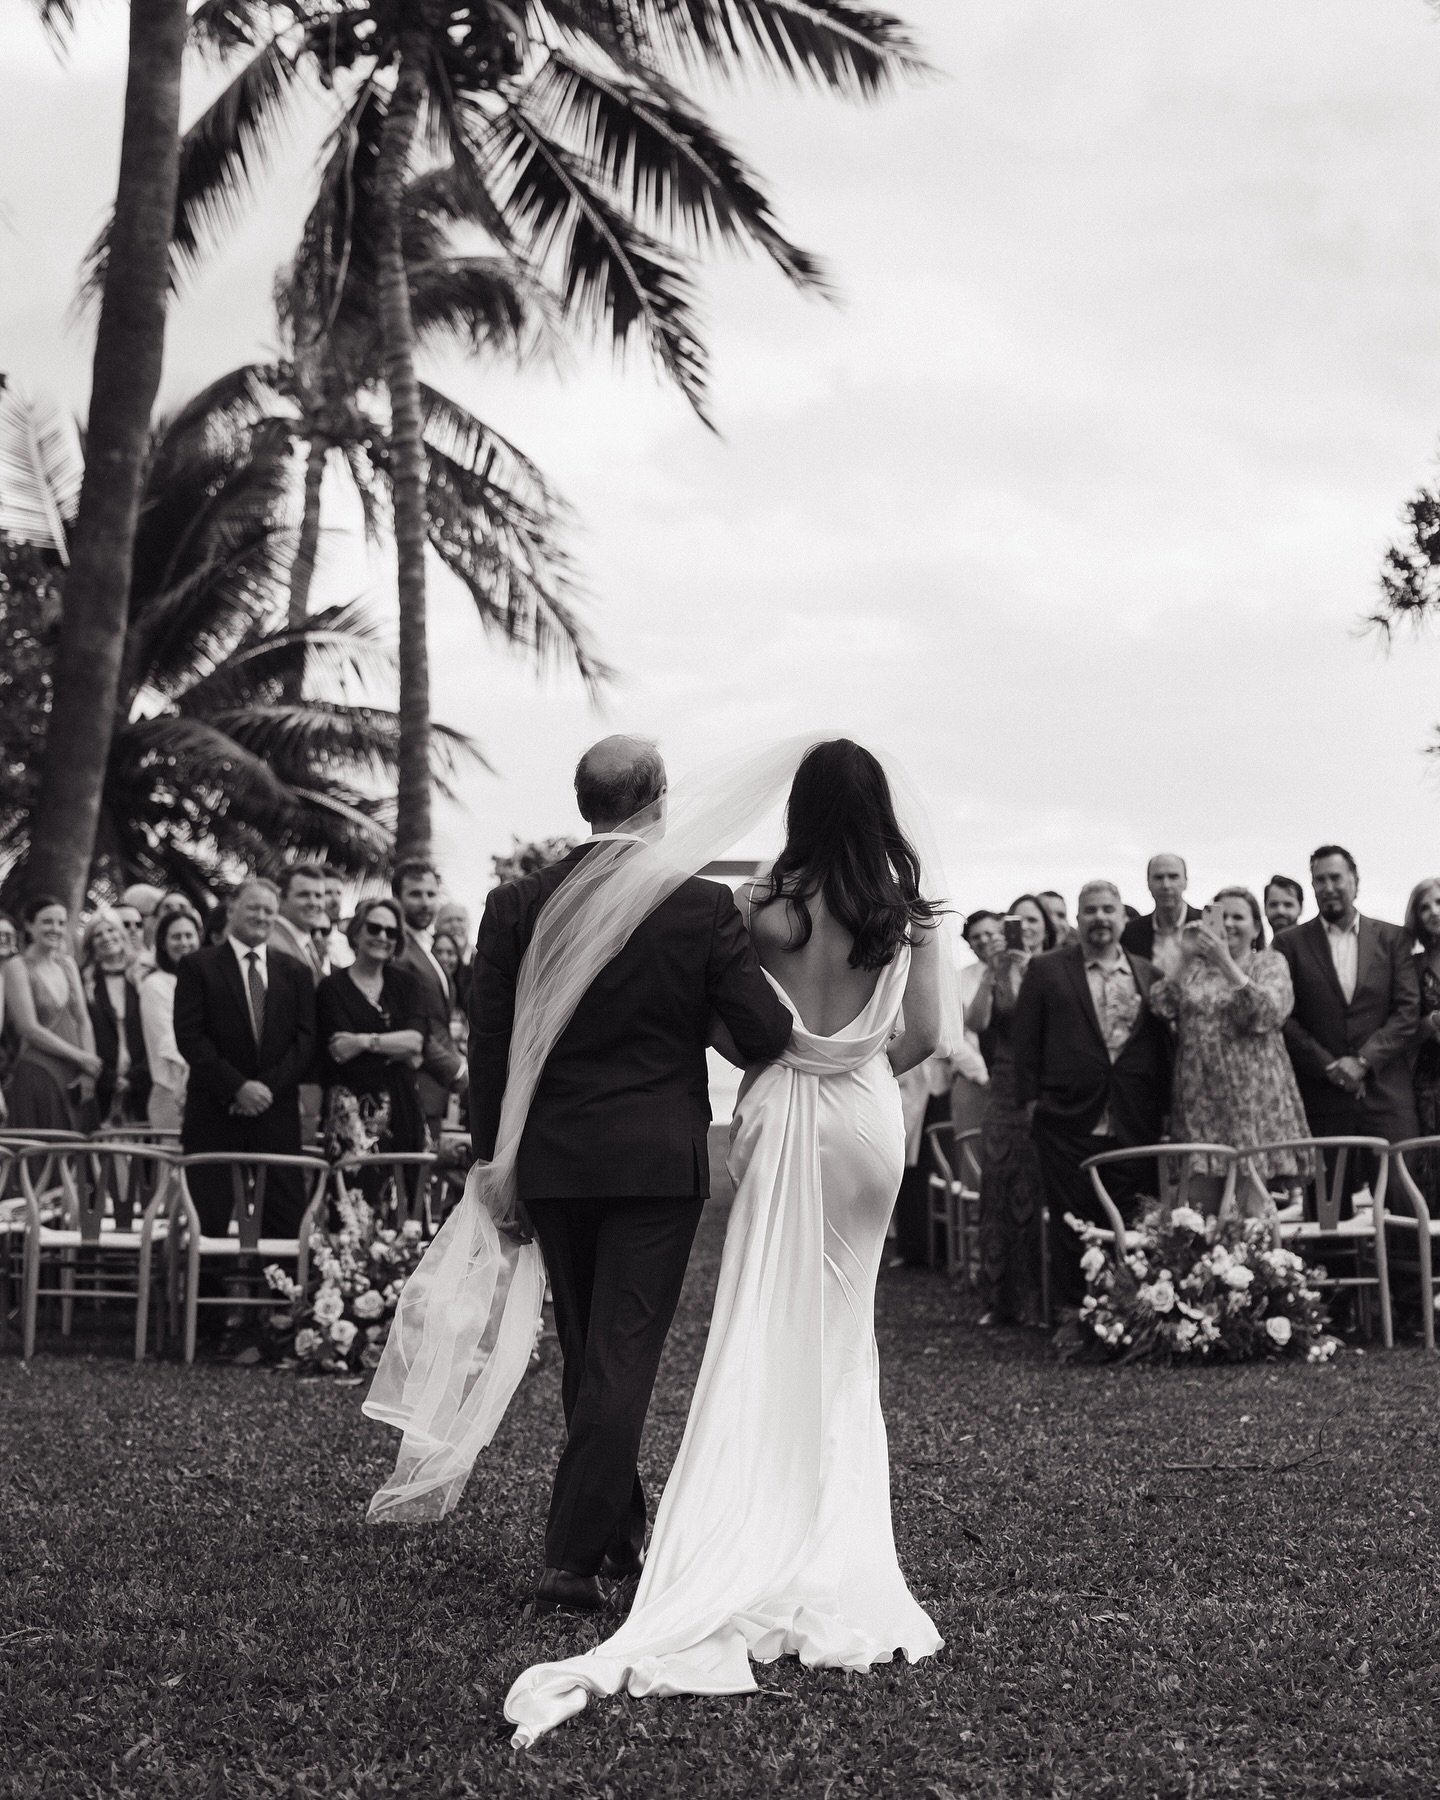 Private first looks, ceremony candids, and reception moments... We definitely have a soft spot
for dreamy B&amp;Ws and this celebration at the Olowalu Plantation House had us falling in love all over again! 

Event Design &amp; Coordination @whiteorc